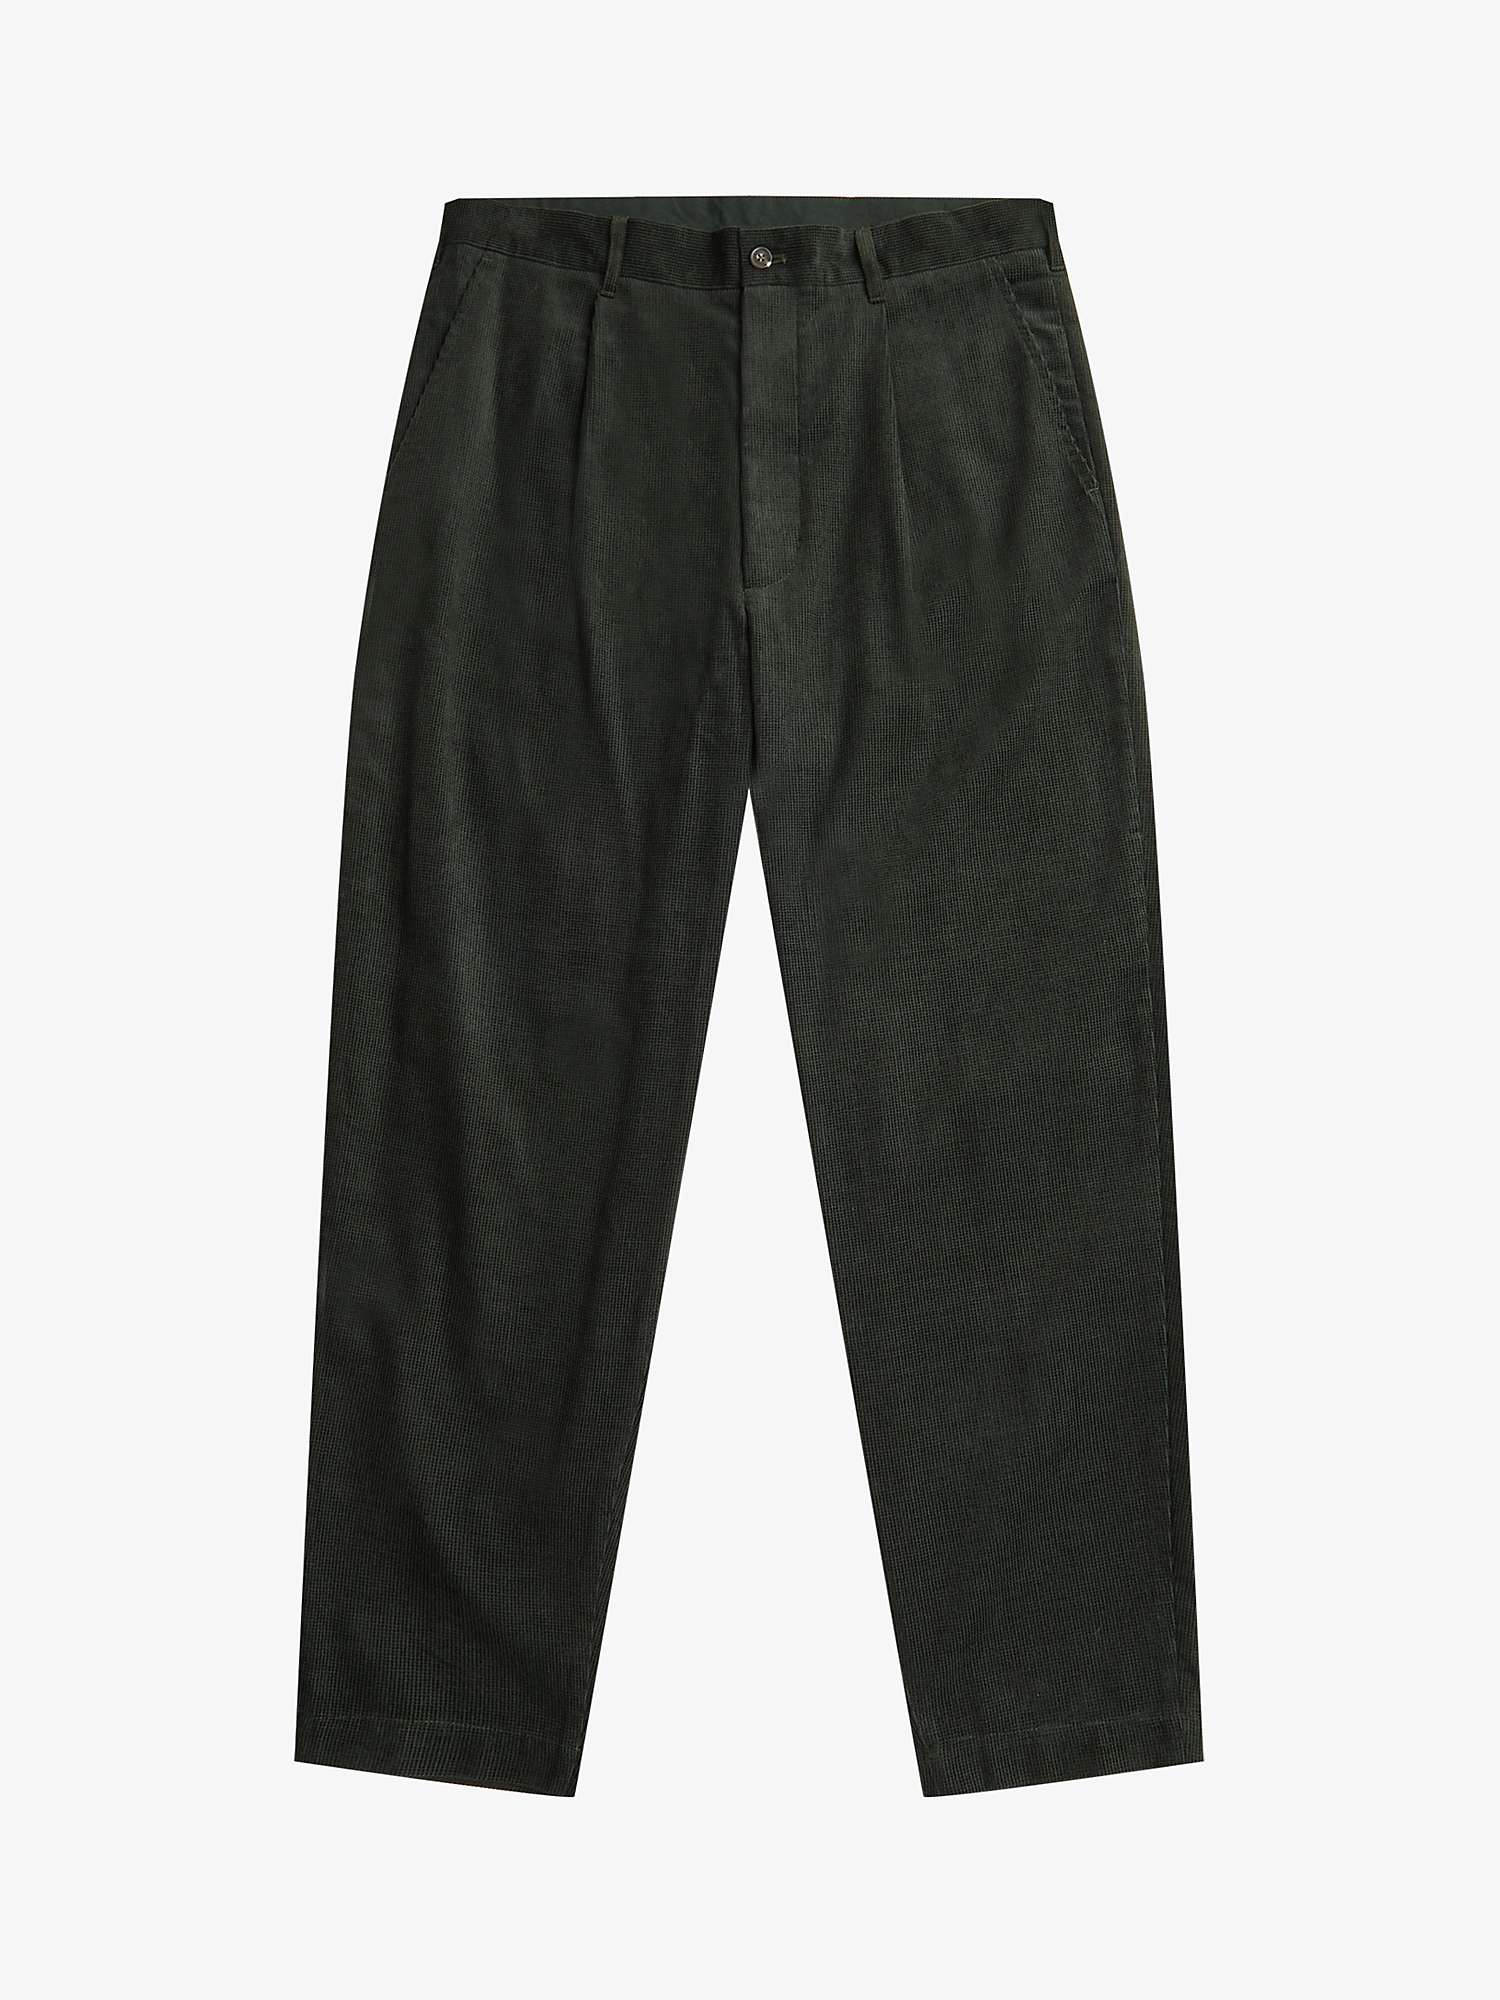 Buy Fred Perry Waffle Cord Tapered Trousers Online at johnlewis.com